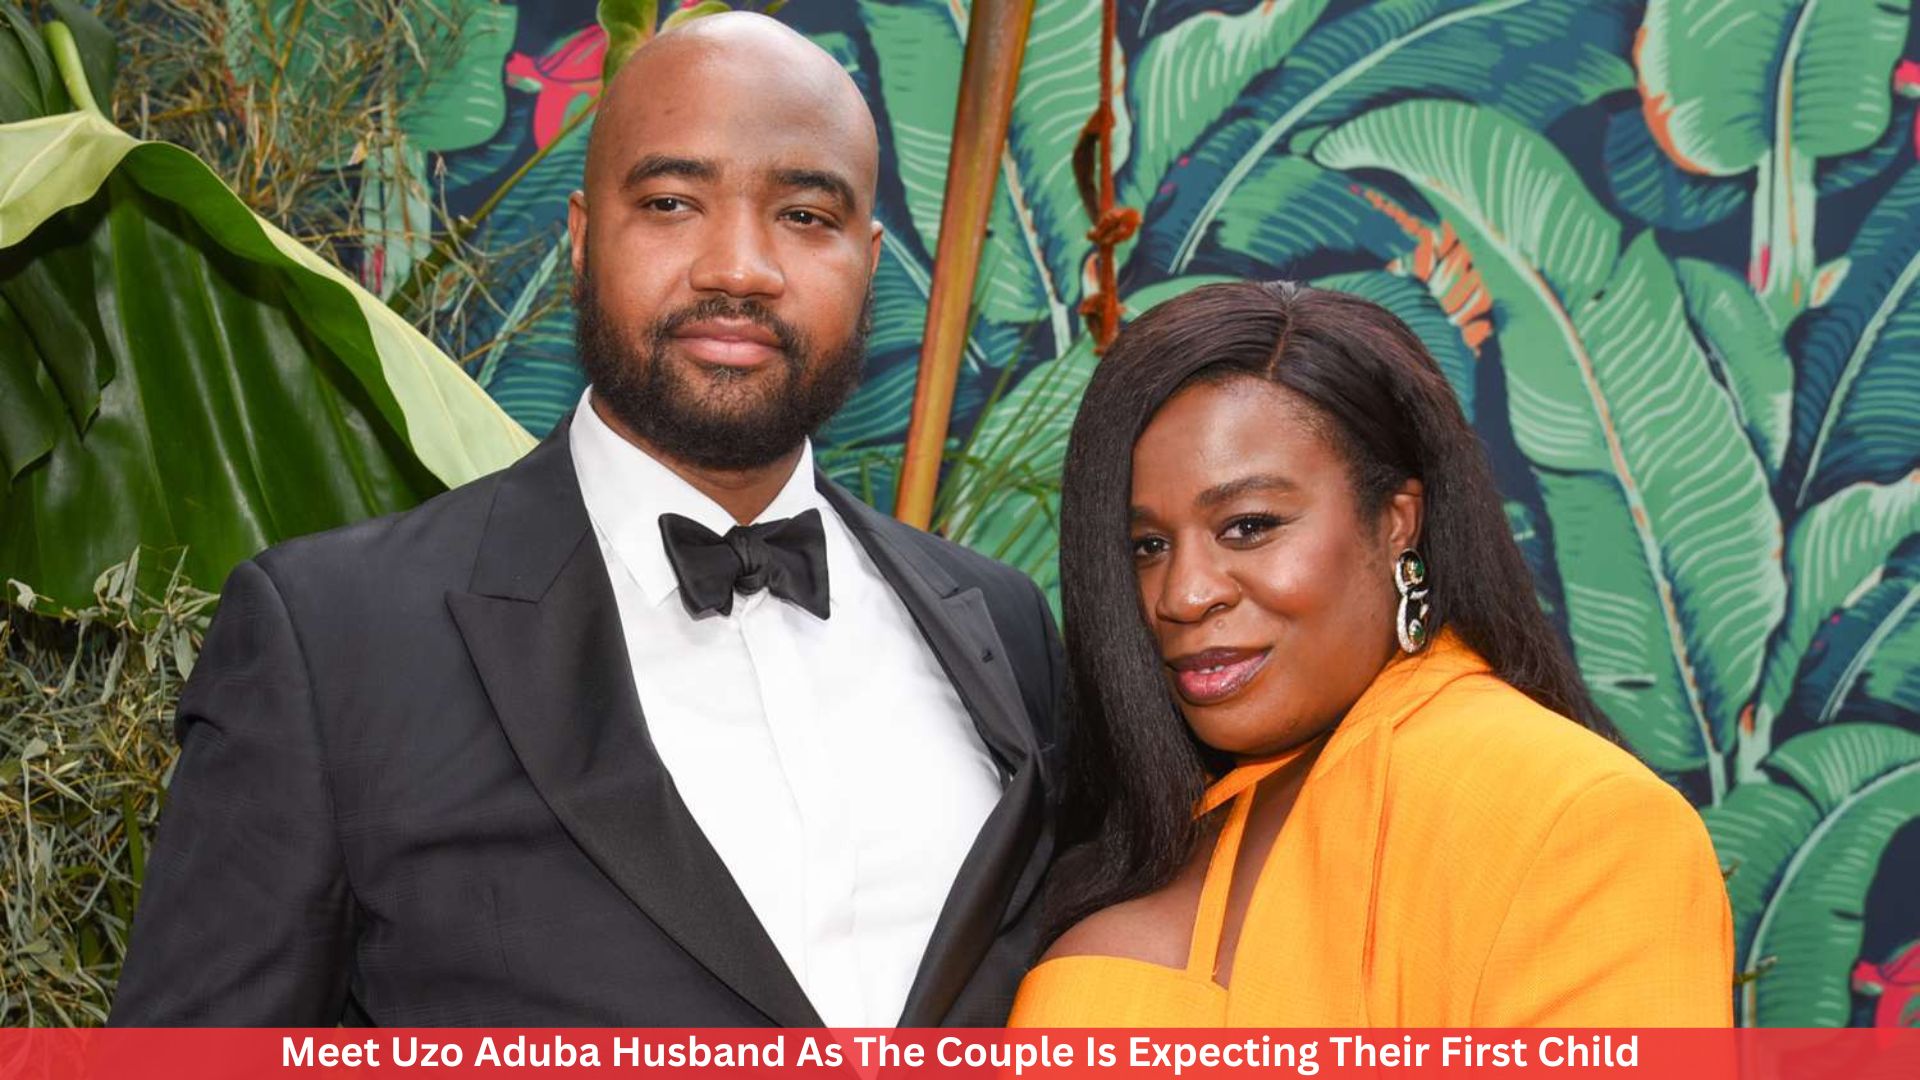 Meet Uzo Aduba Husband As The Couple Is Expecting Their First Child